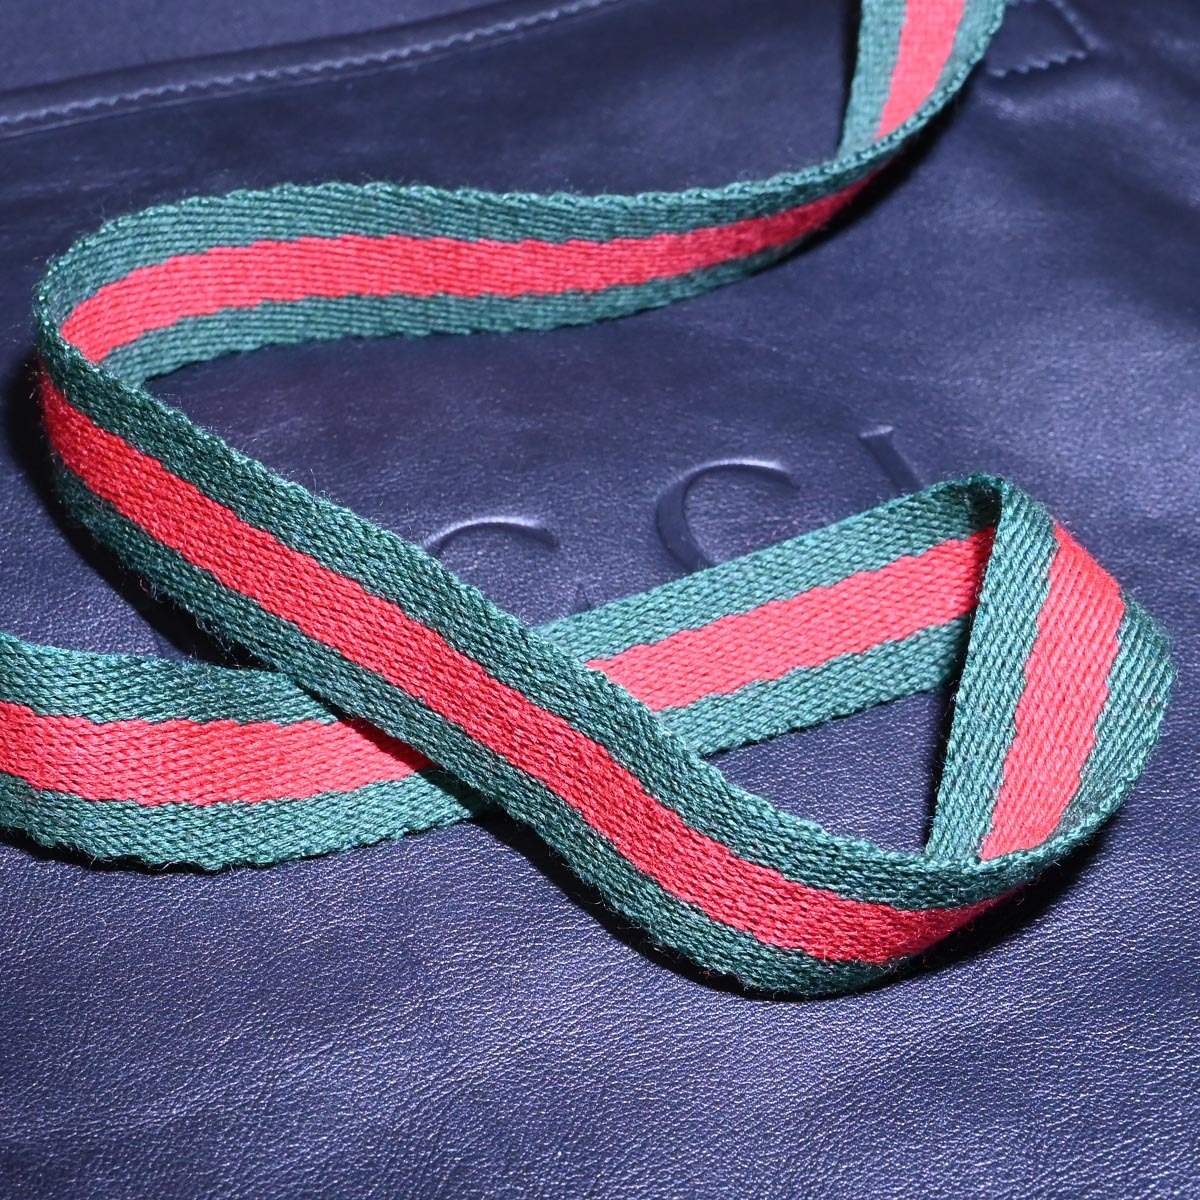  genuine article new goods Gucci ultimate rare Meister exclusive use web line all leather apron black leather small articles leather craft GUCCI